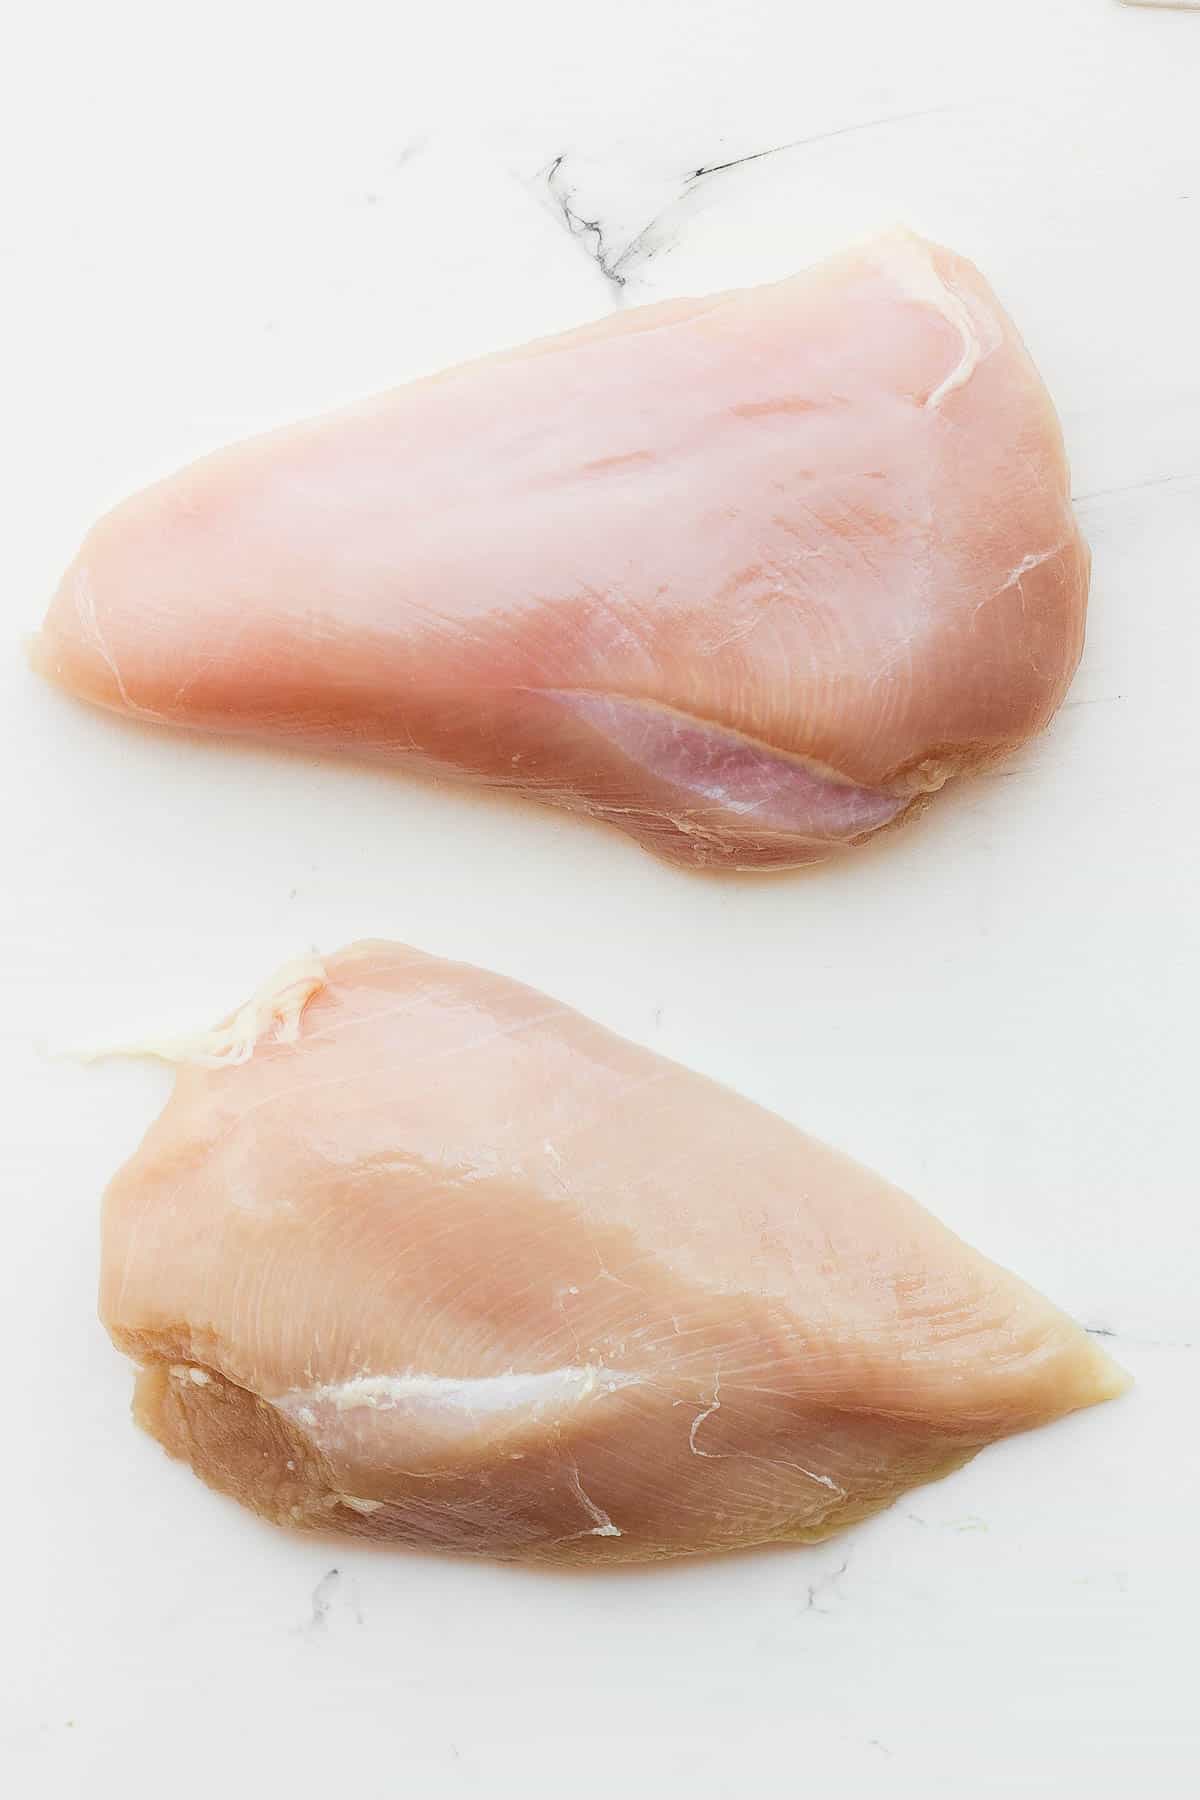 Two raw chicken breasts on a white cutting board.